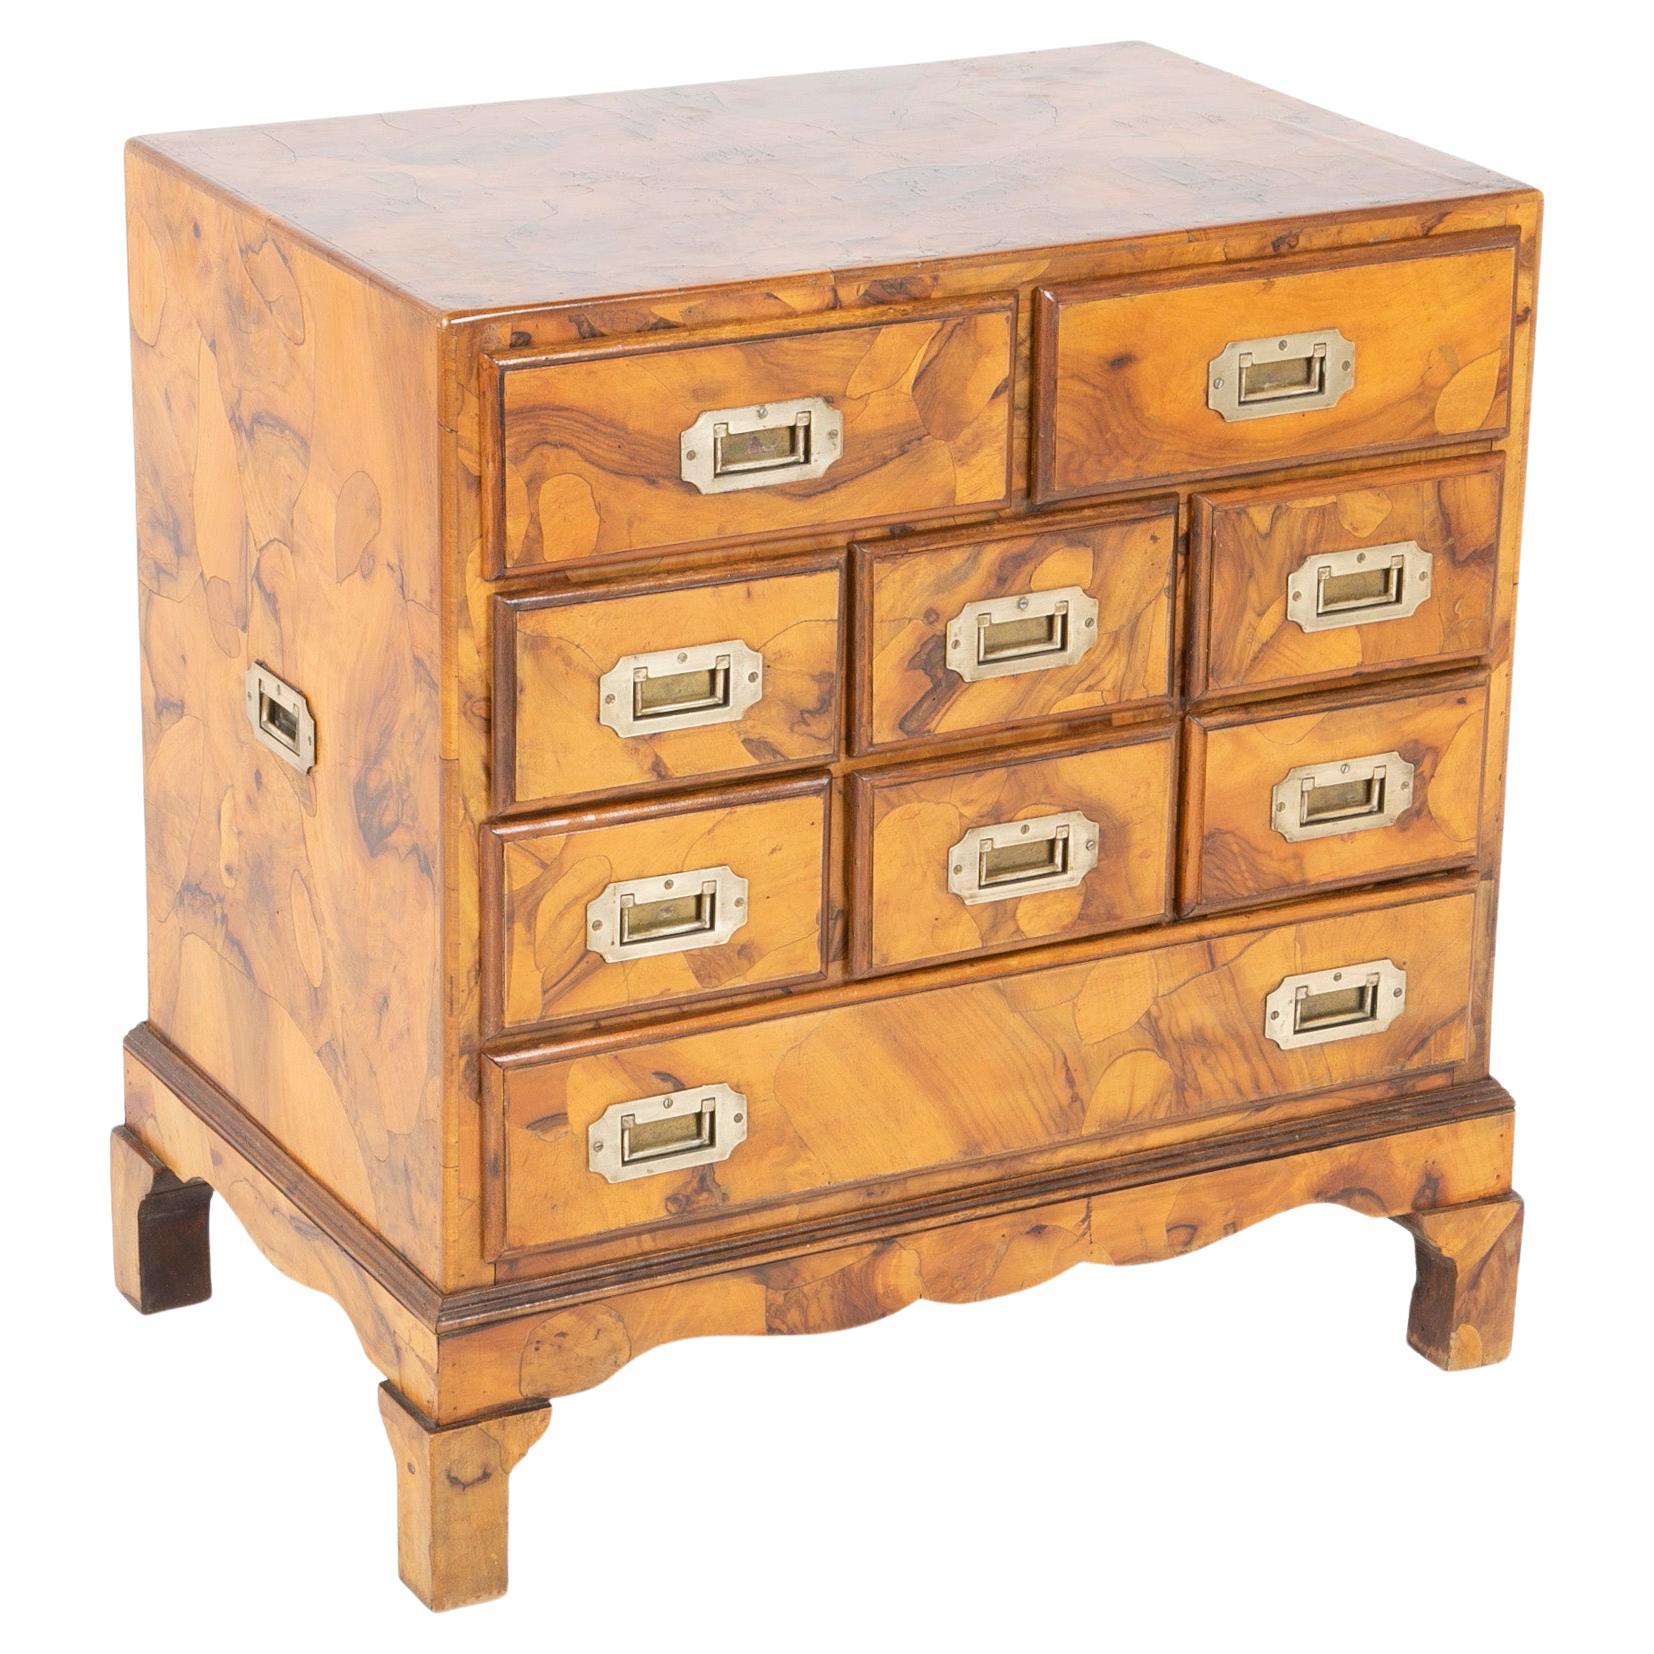 Italian Campaign Chest of Drawers with Olive Wood Veneer, Mid-20th Century For Sale